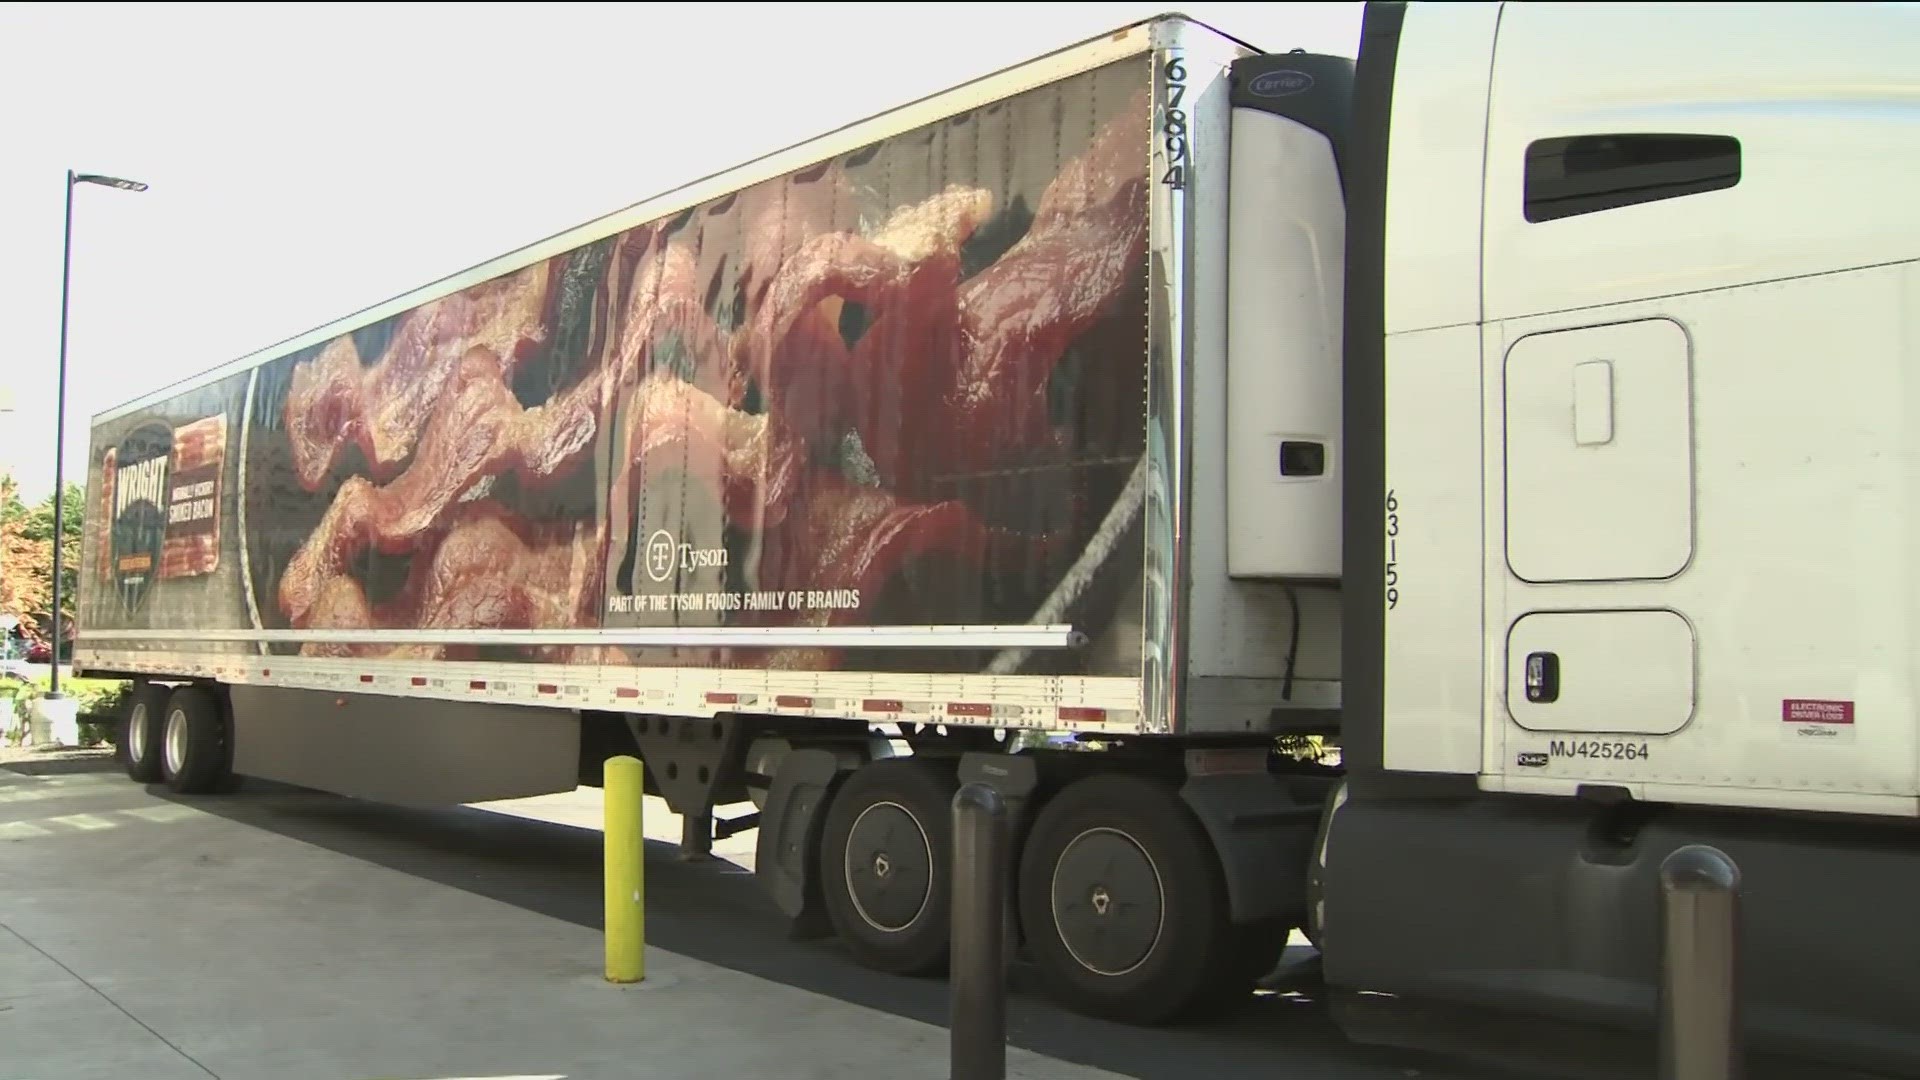 Over the past 15 years, Tyson Foods has donated more than 2.4 million protein servings to help Idahoans facing food insecurity, a news release said.